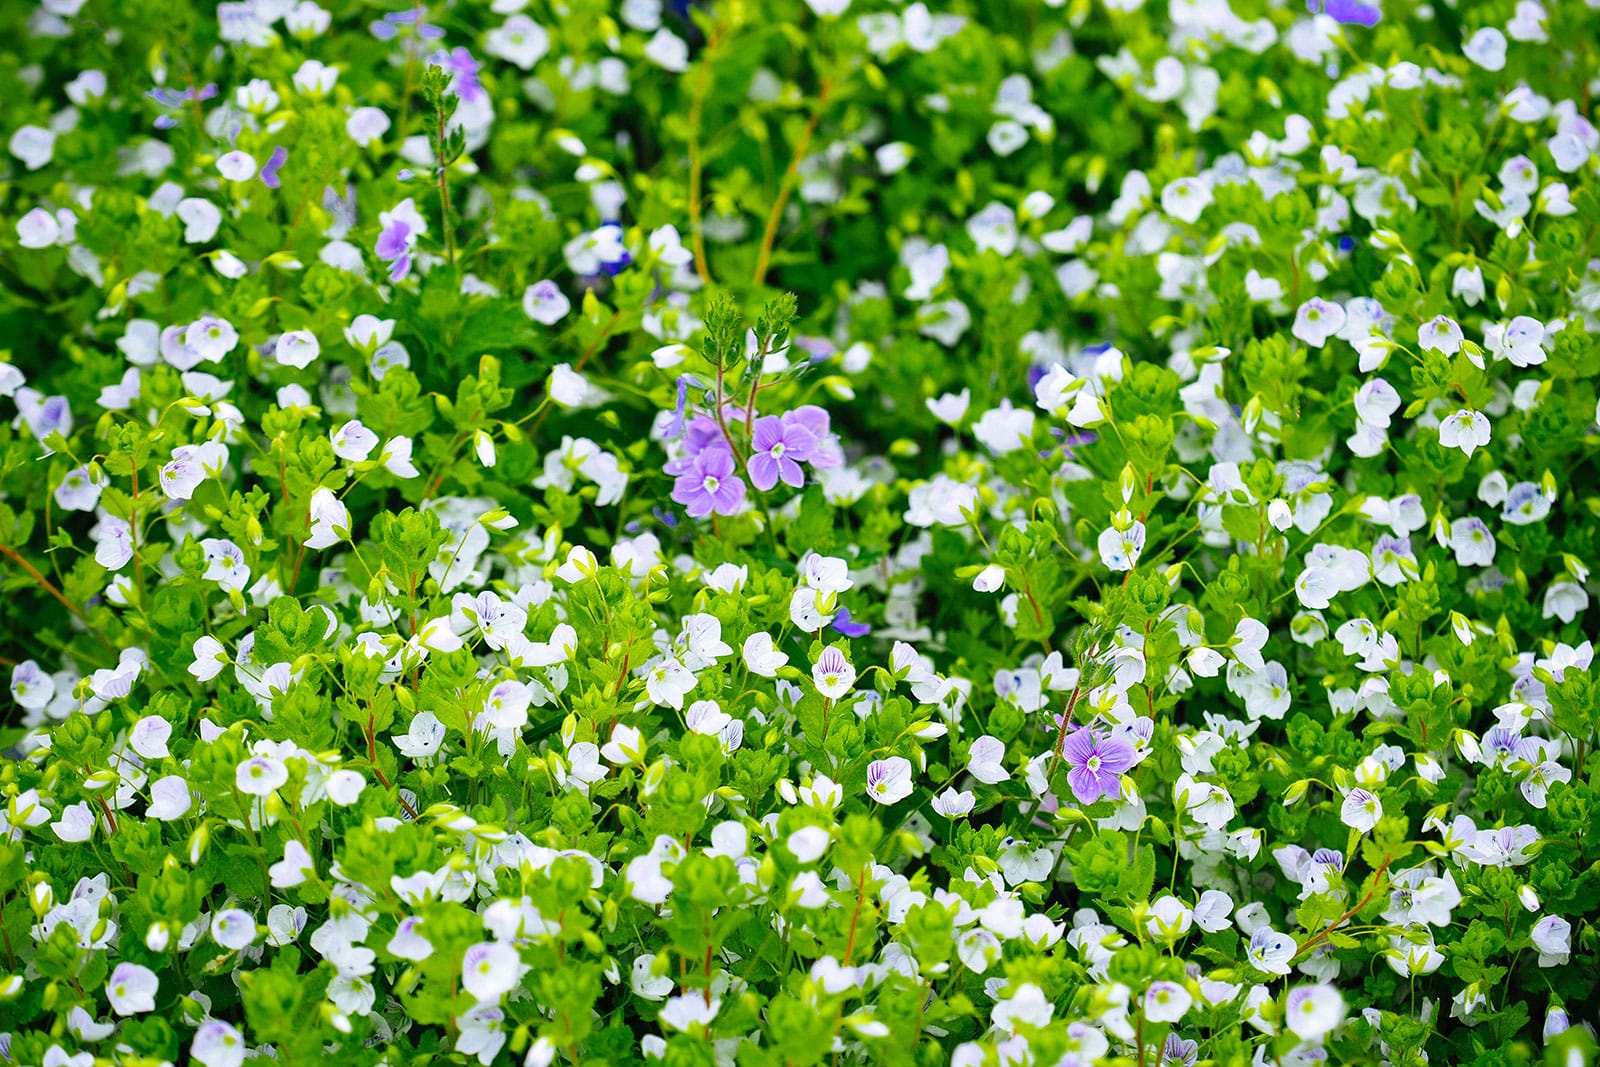 Creeping speedwell in bloom with white and lavender flowers